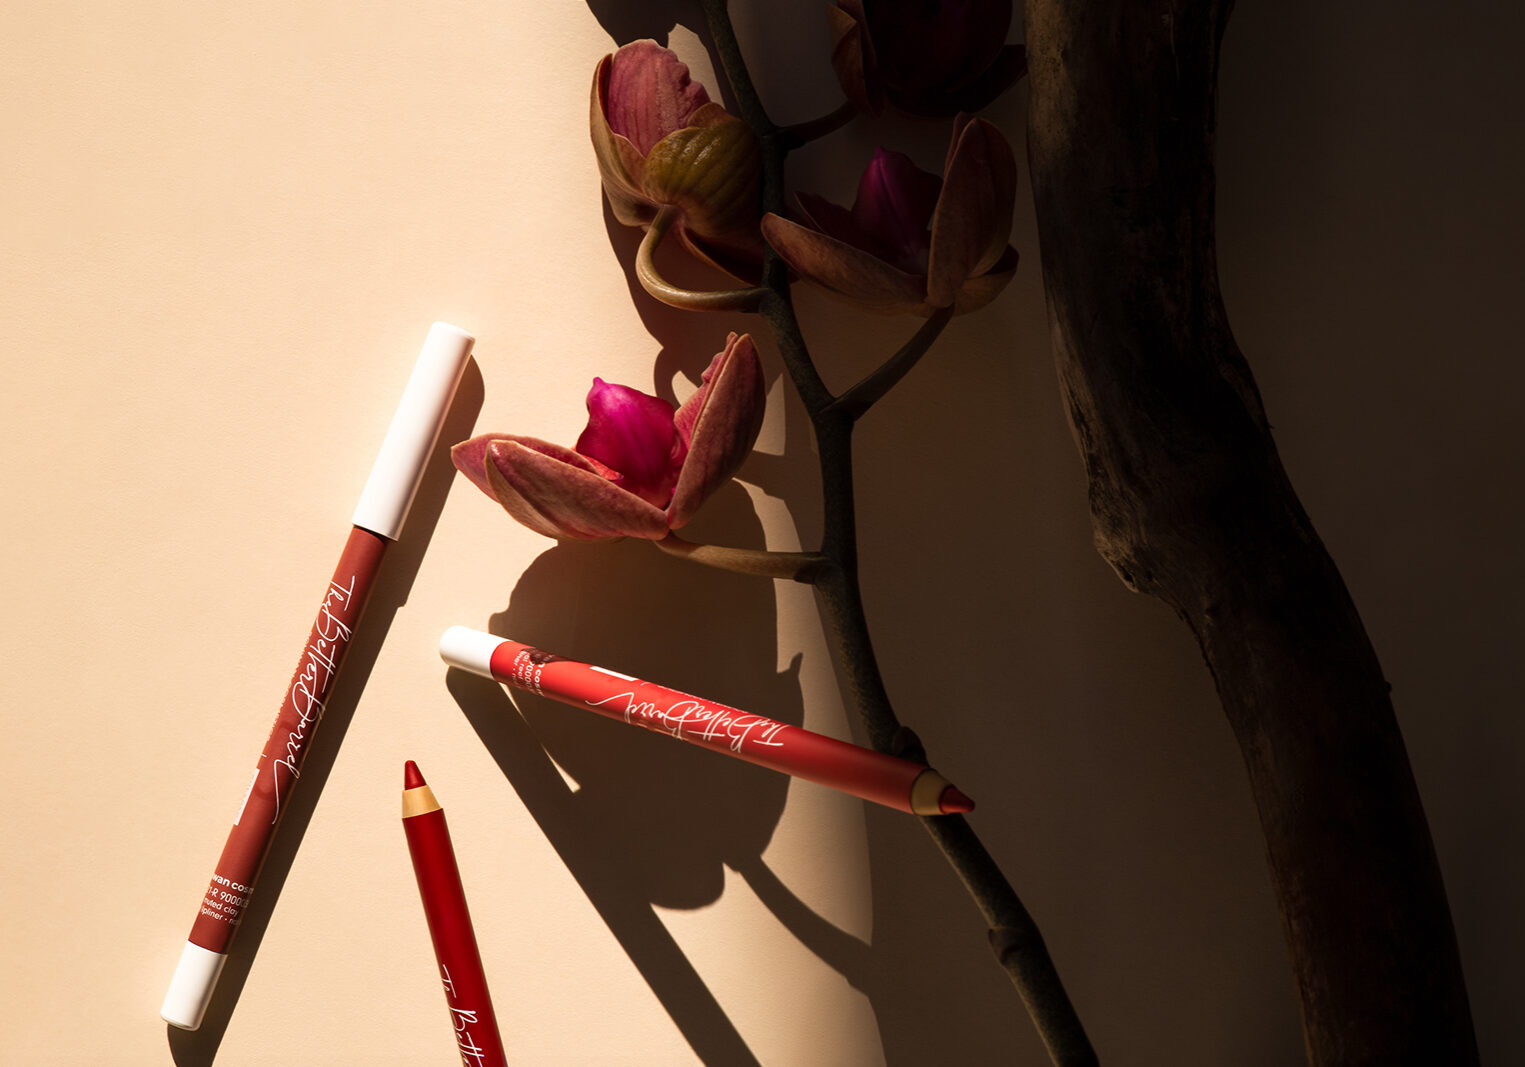 Styled product photo of red make-up liners placed next to a branch and a flower.